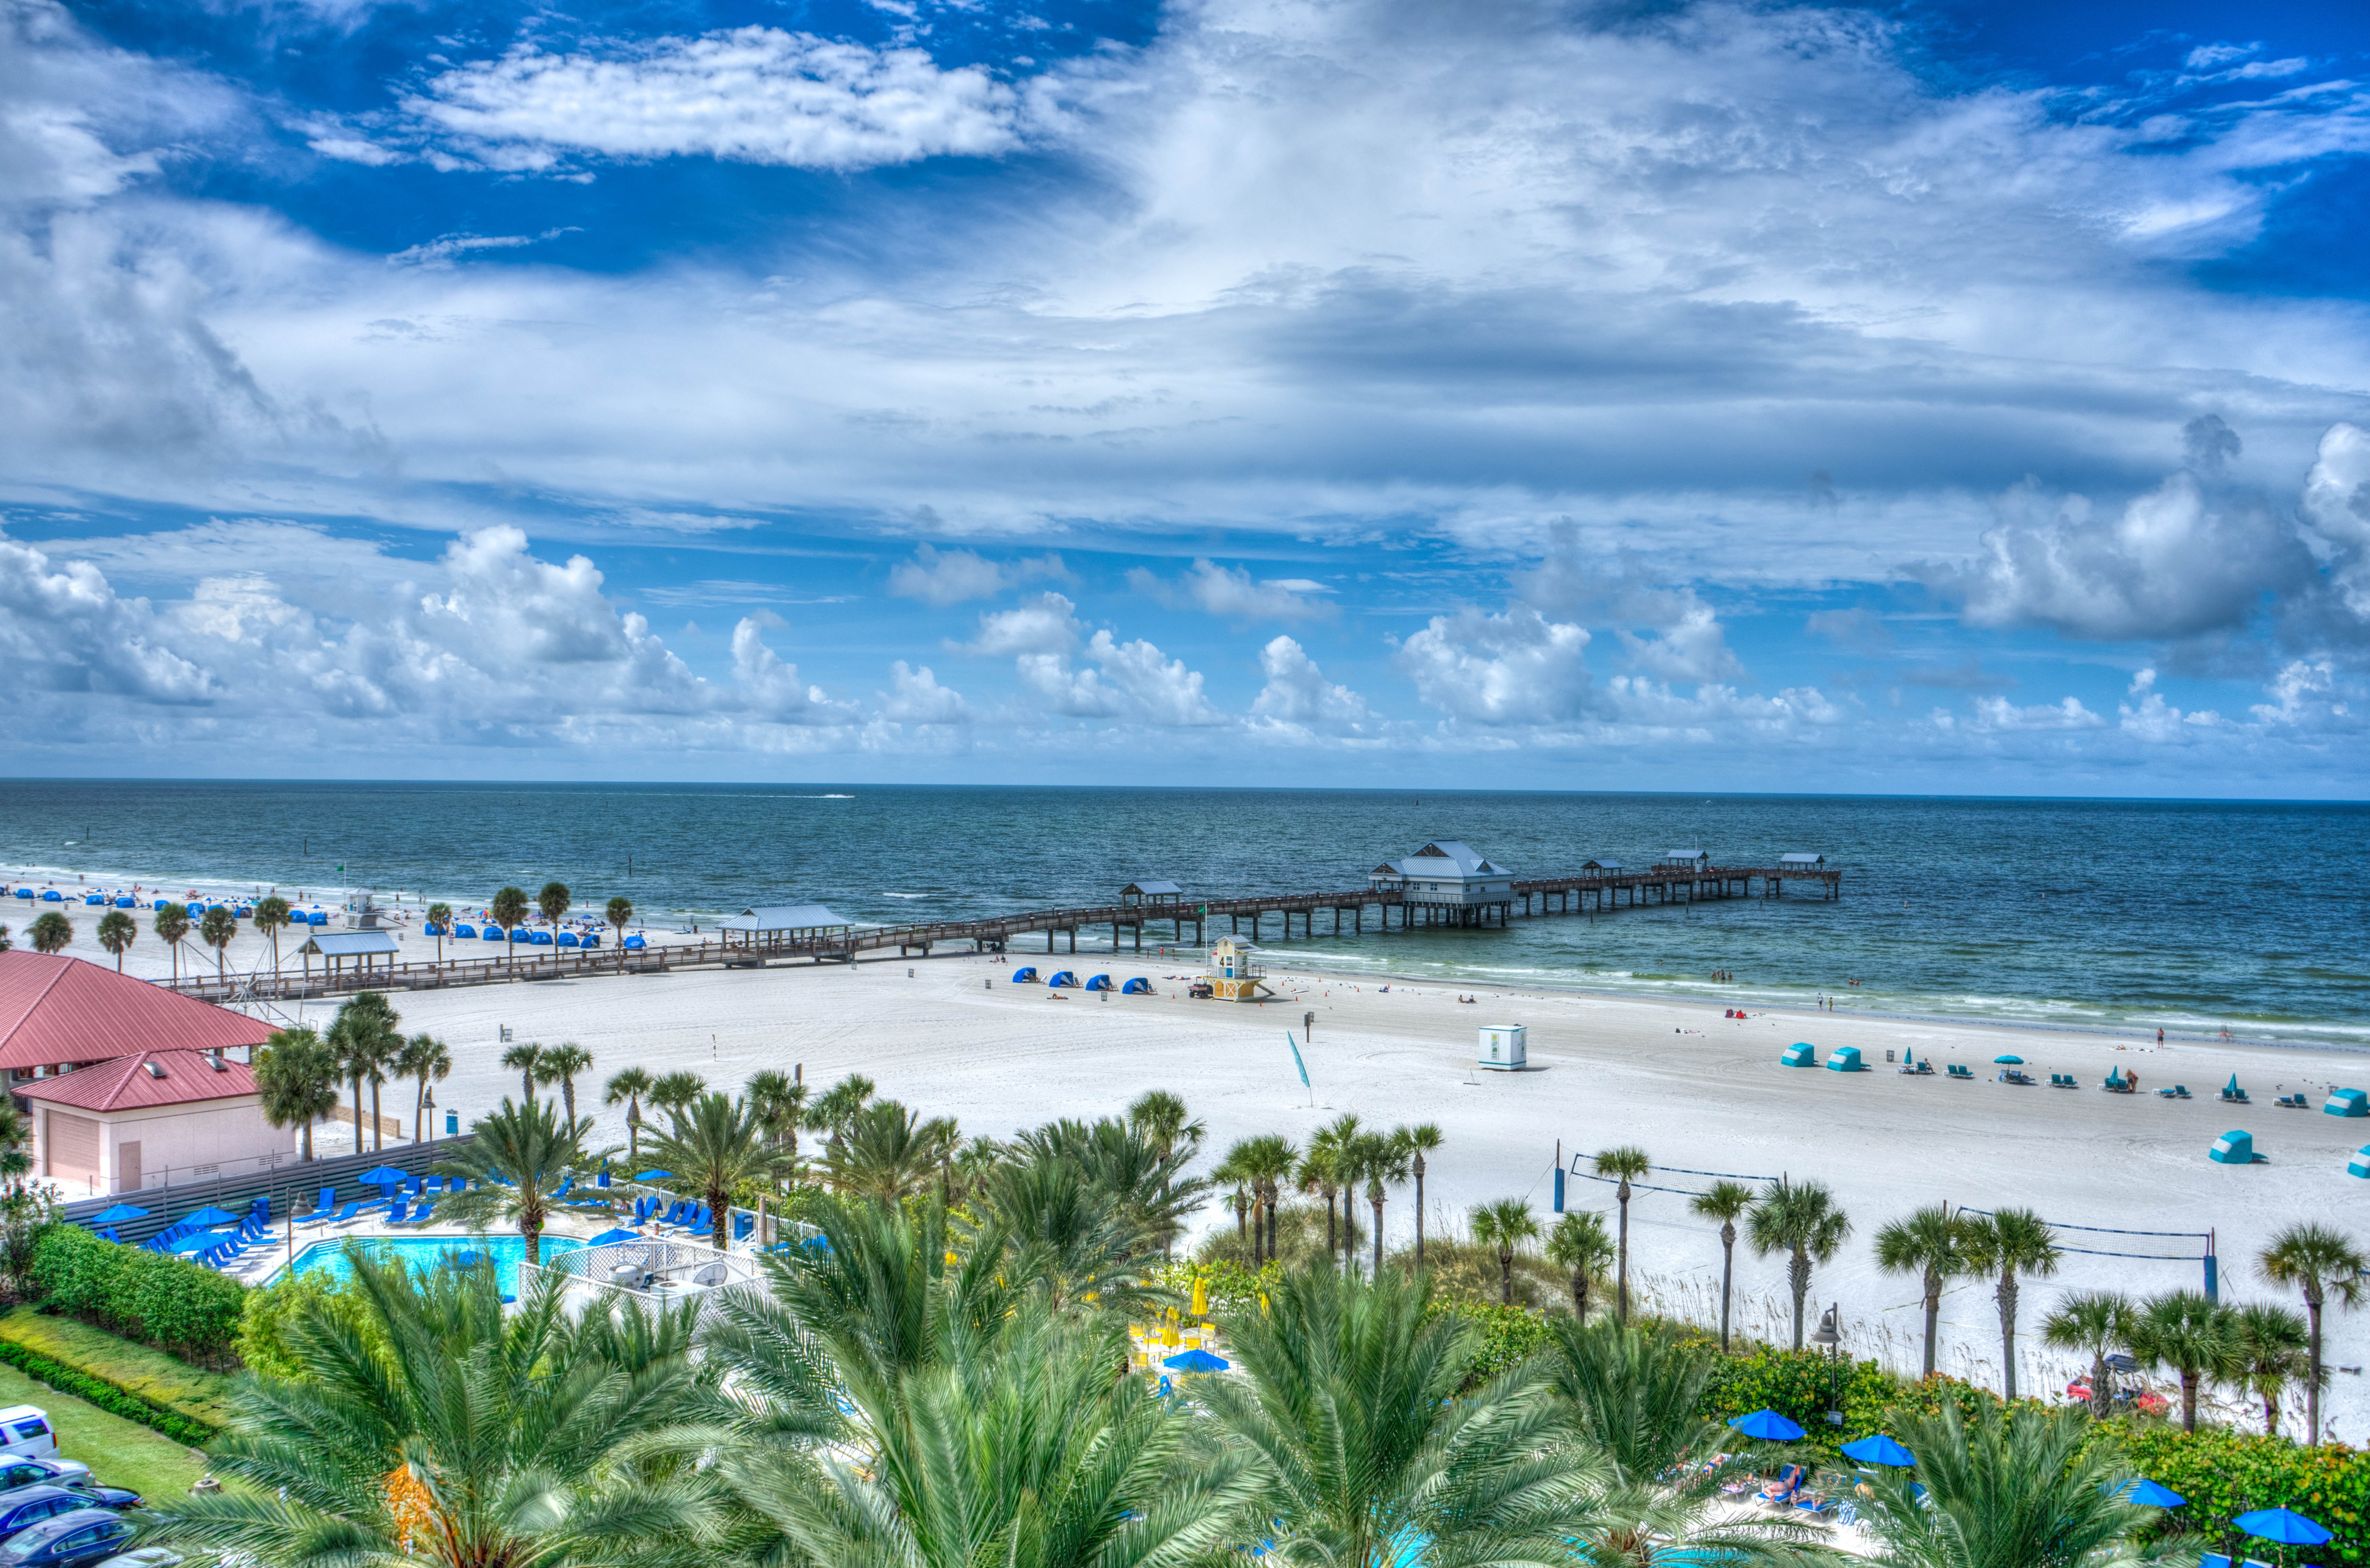 The Best Time of Day to Visit Clearwater Beach